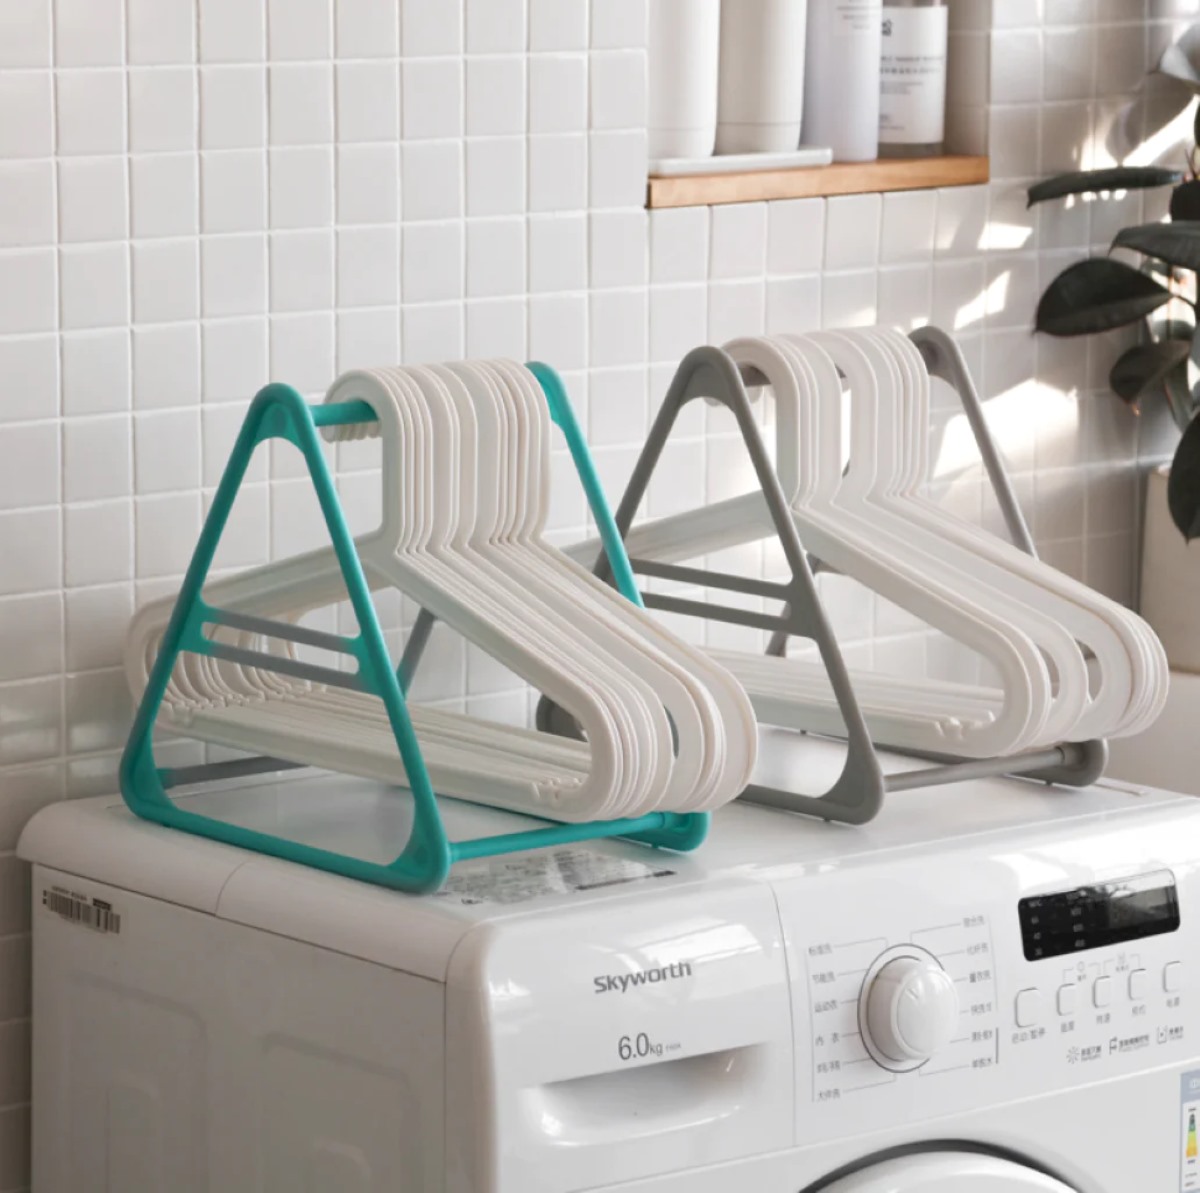 How To Store Hangers In Laundry Room